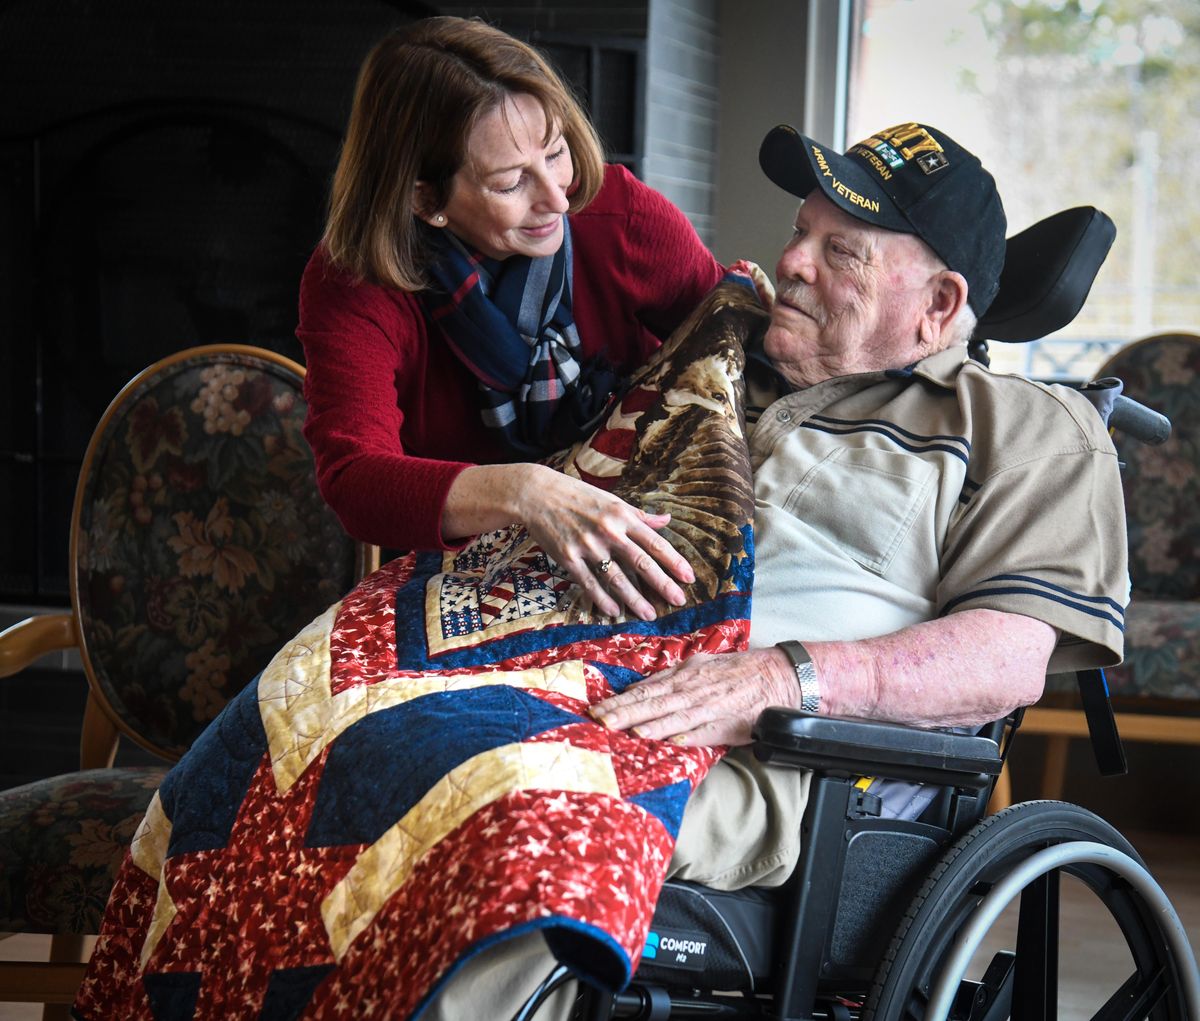 Emily Tate, of Quilt of Valor, left, presents and wraps a quilt around U.S. Army veteran Neal Franklin Sr., who served during the Vietnam War,Tuesday, Feb. 4, 2020 at St Joseph Care Center. (Dan Pelle / The Spokesman-Review)